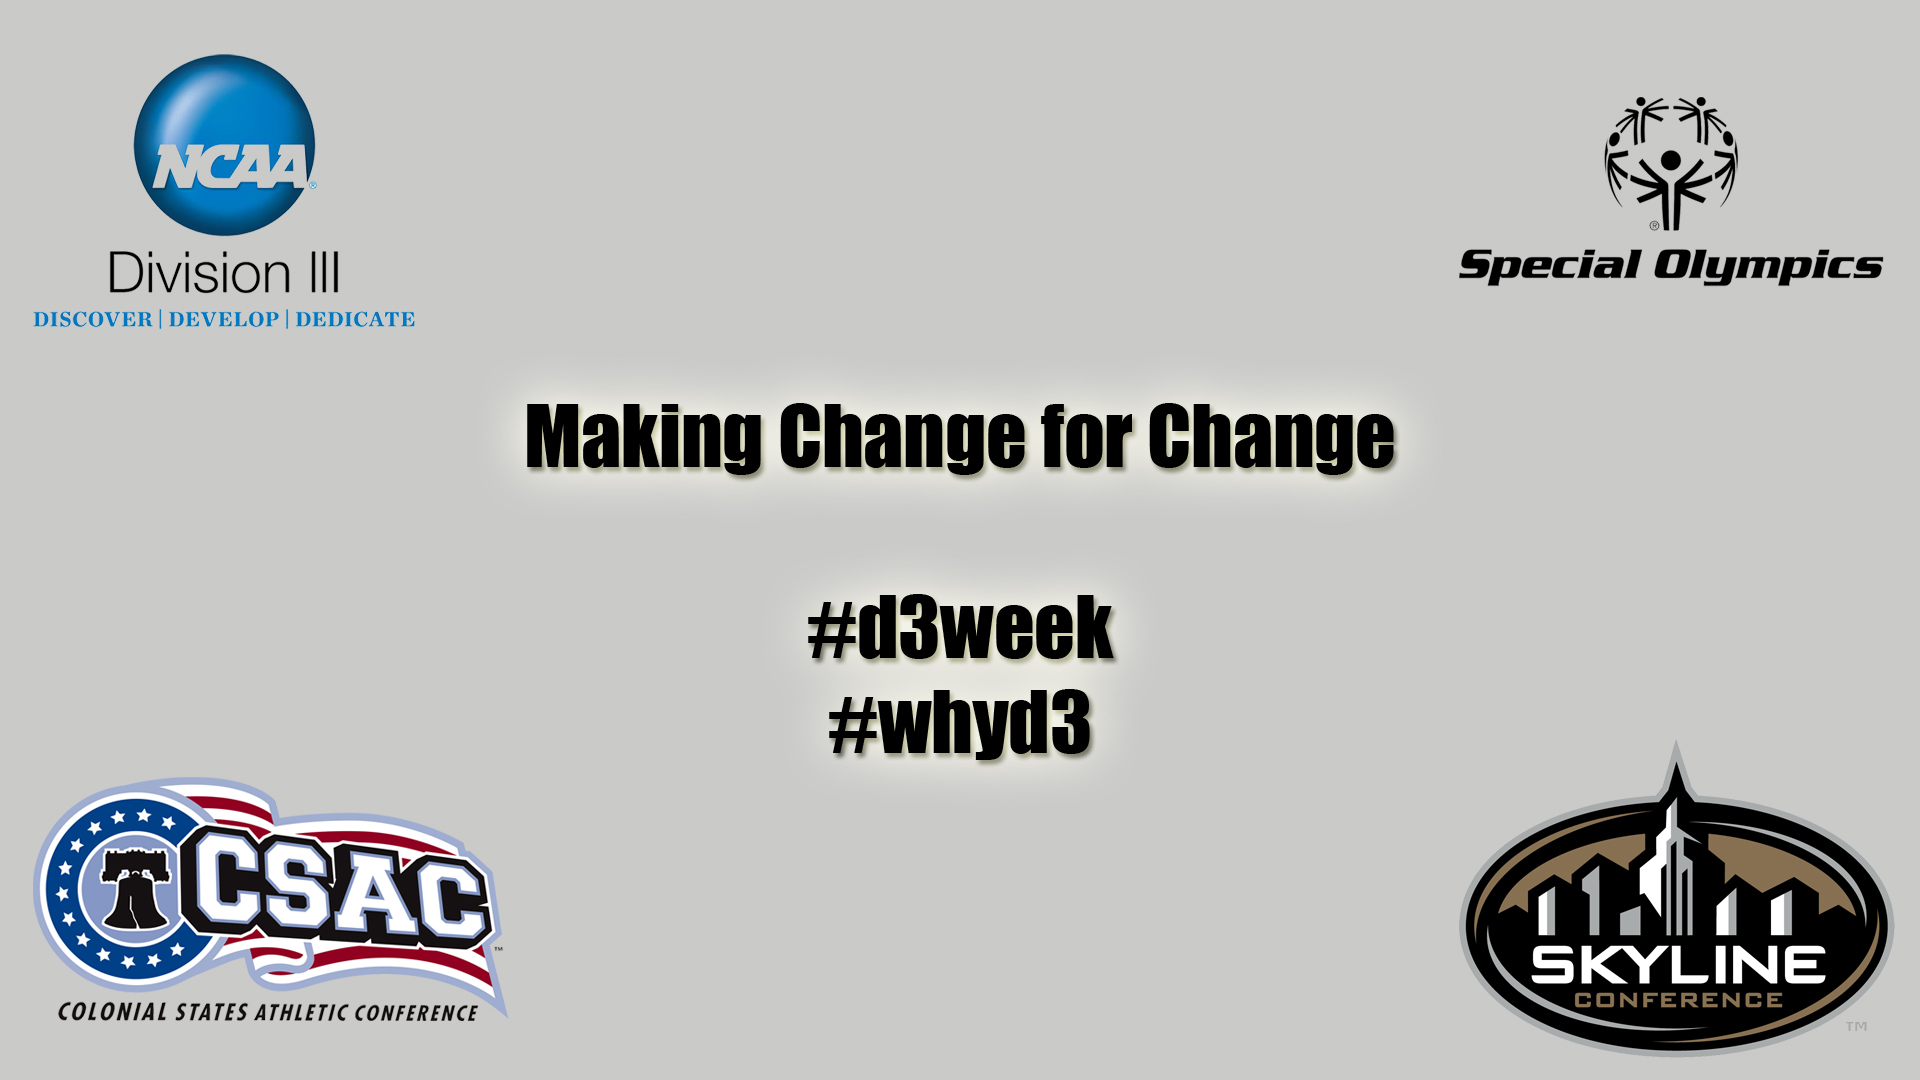 Skyline and CSAC to Partner on "Making Change for Change" Special Olympics Initiative During D3 Week